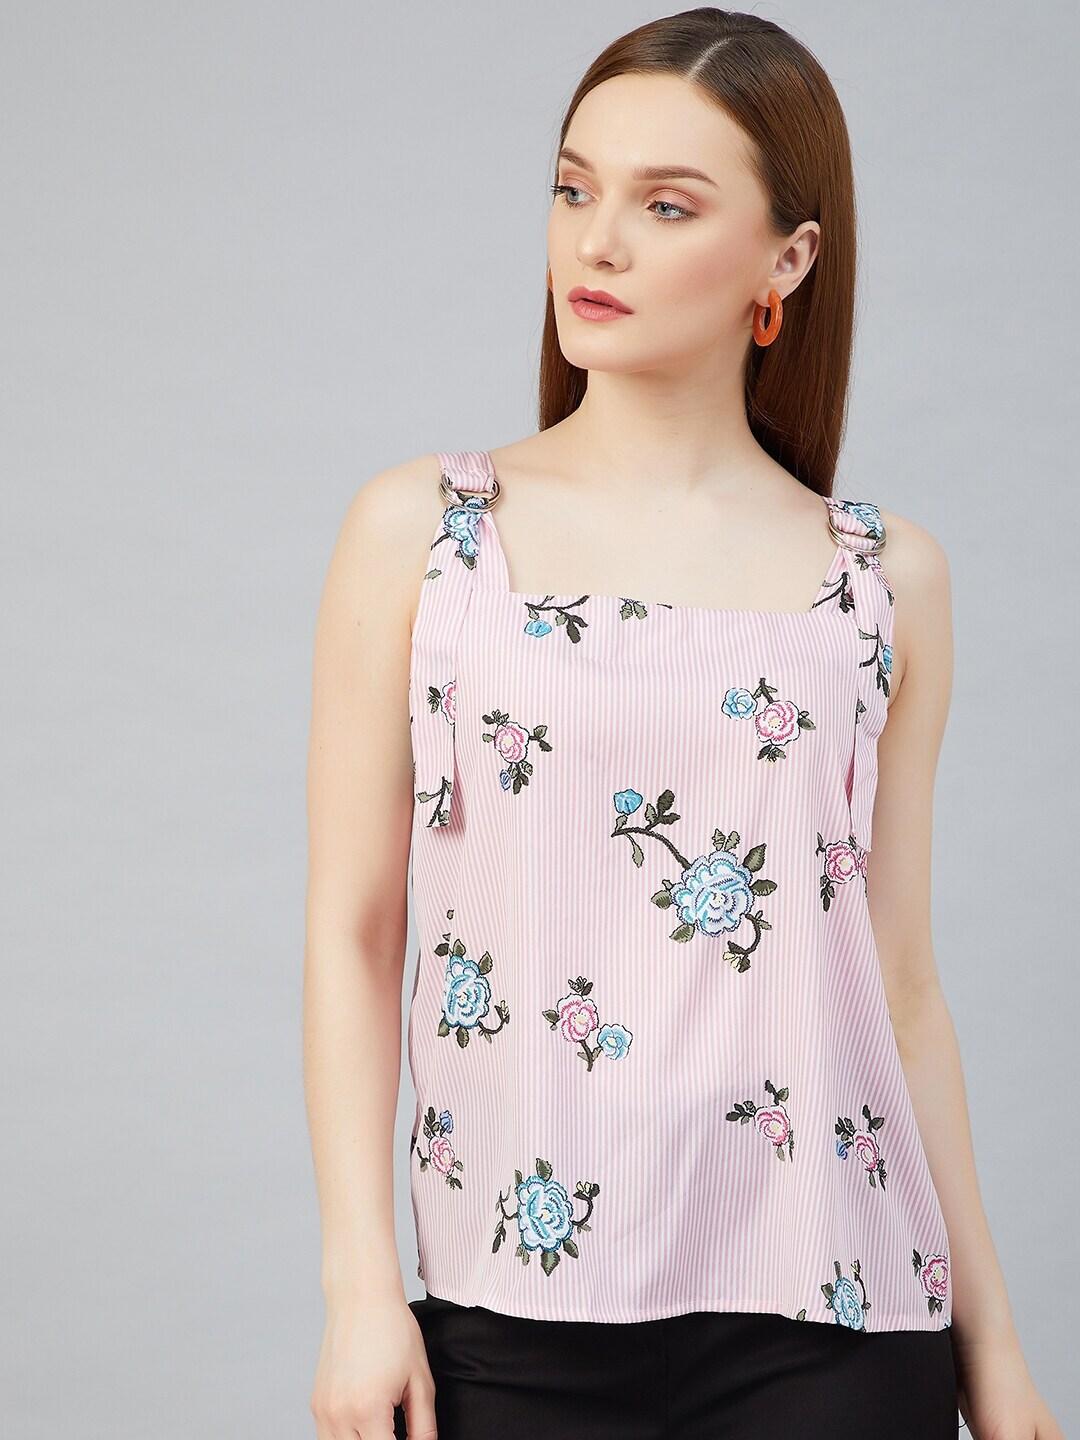 Marie Claire Pink Floral Crepe Regular Top